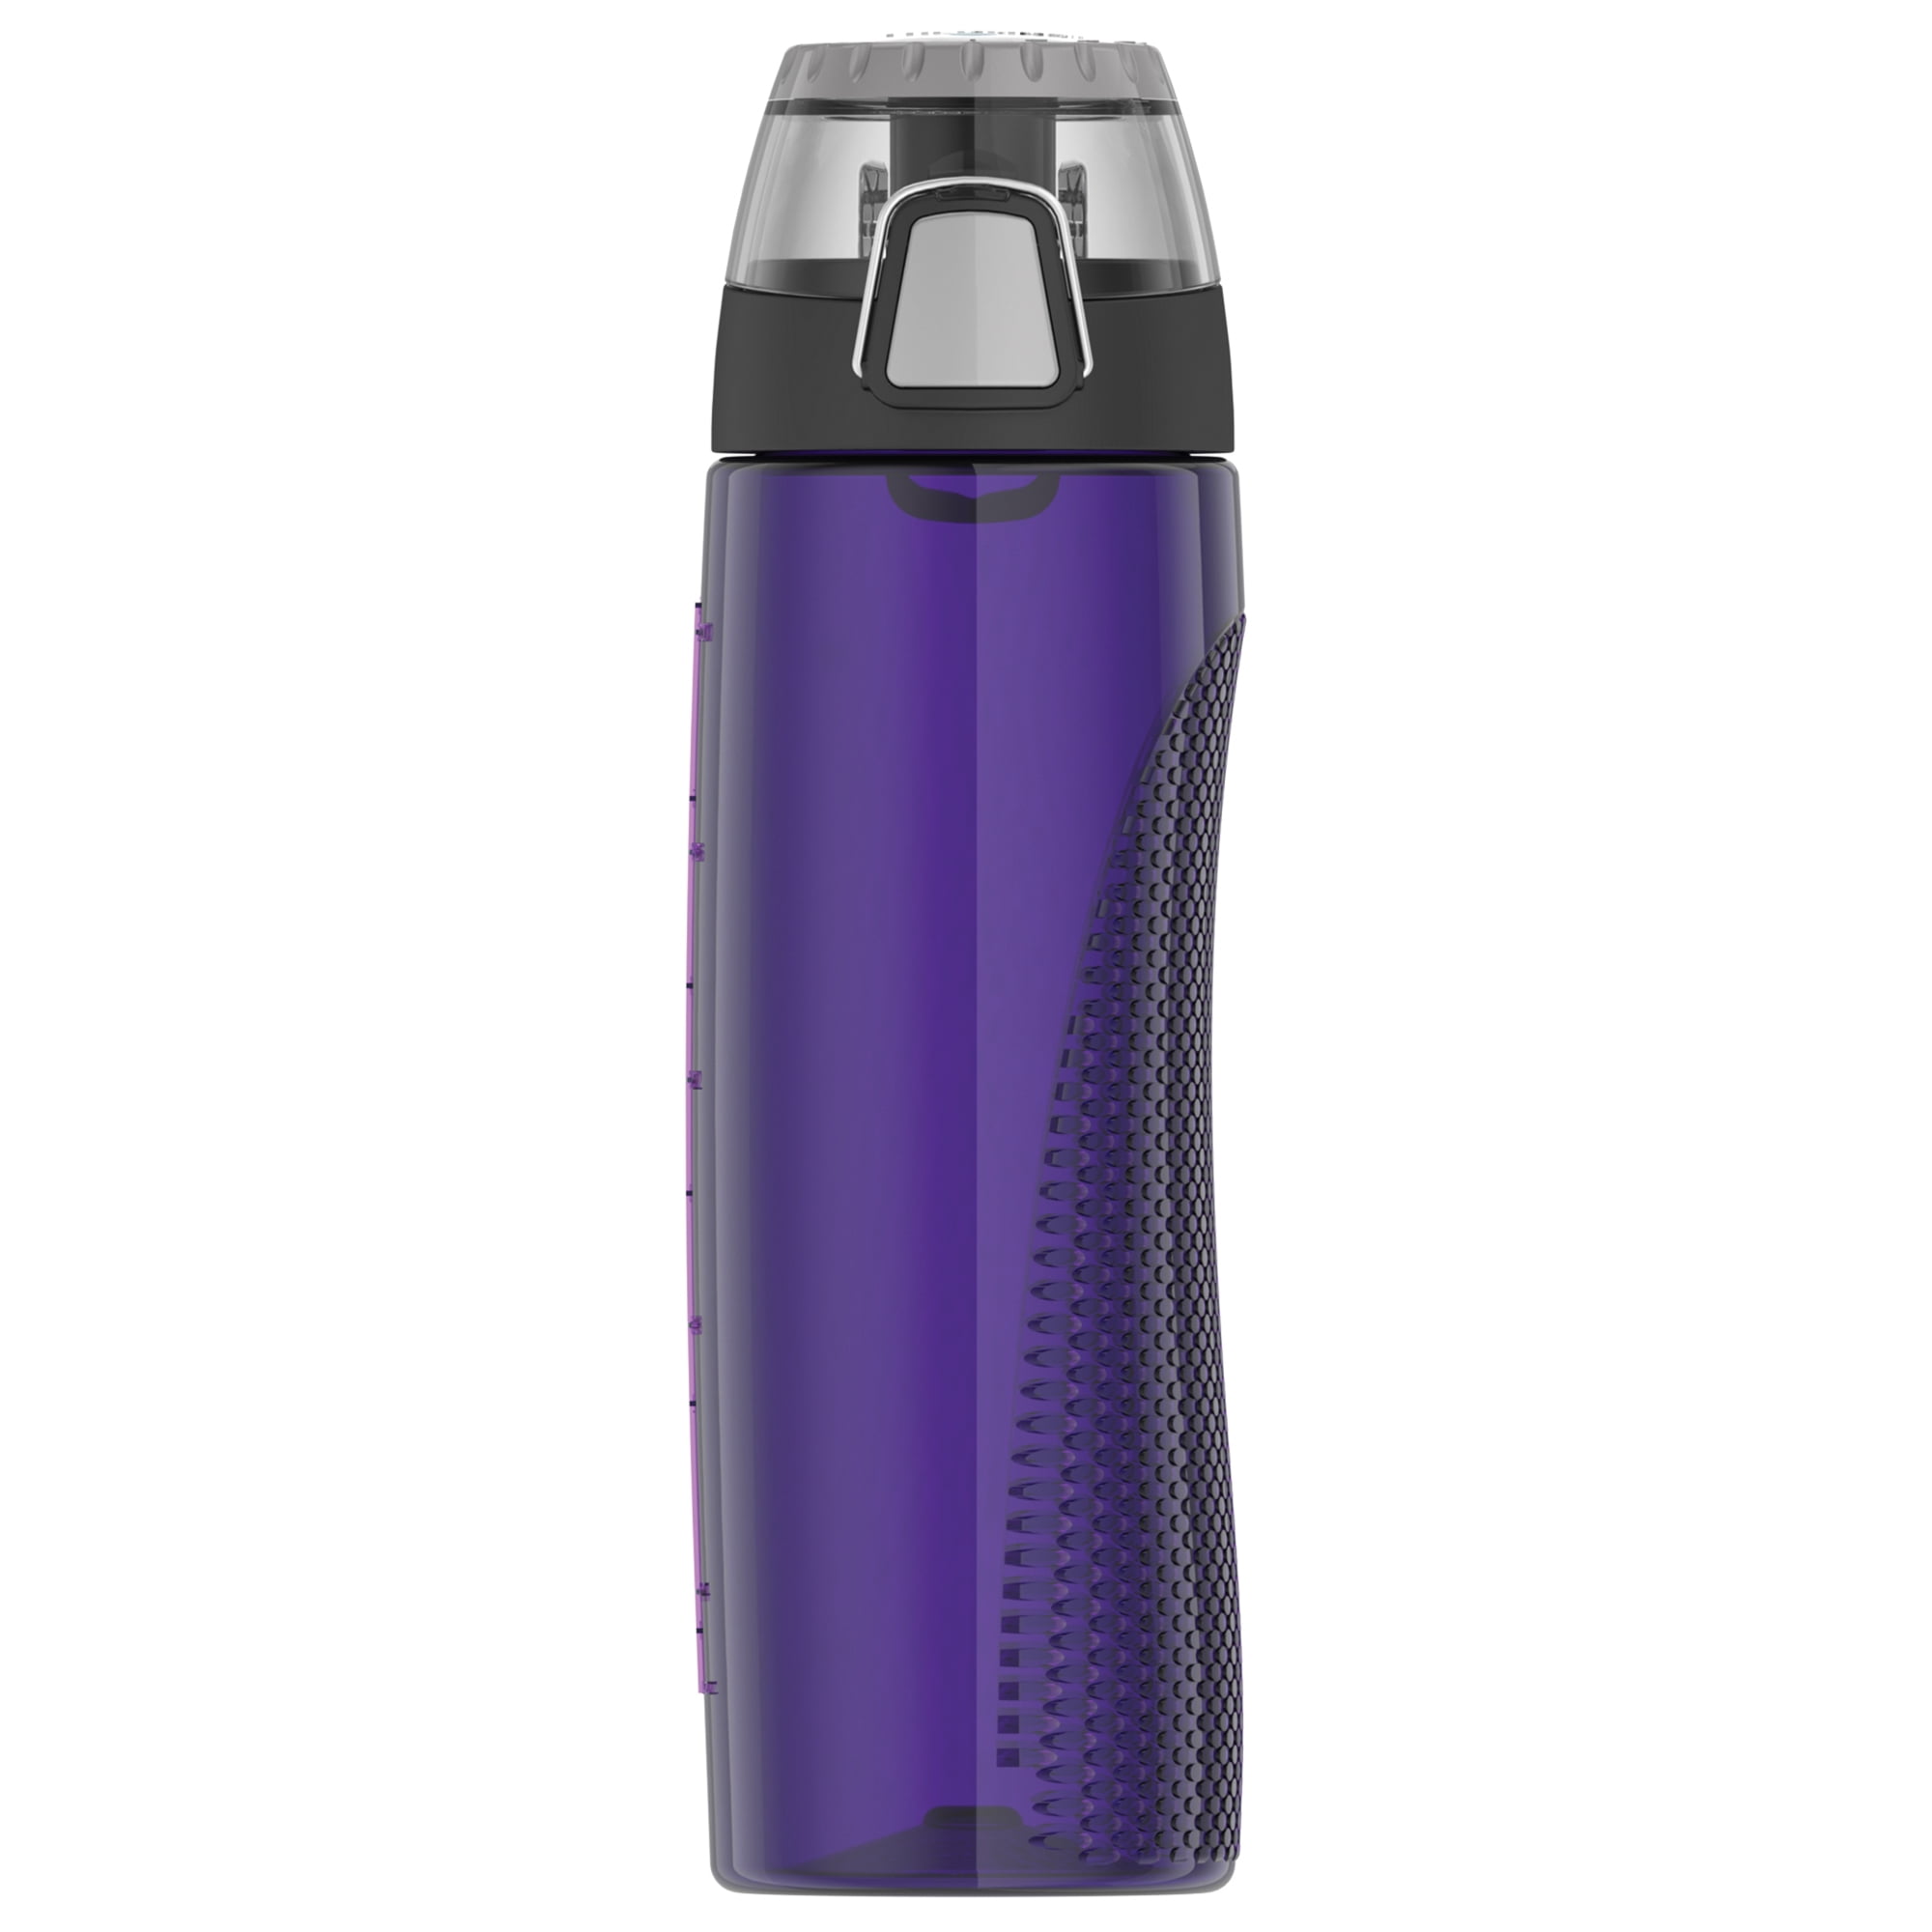 24BOTTLES Clima Bottles - Insulated Water Bottle 11oz/17oz/29oz, Water  Bottles with 100% Leak Proof Lid (12 Hours Hot and 24 Hours Cold  Beverages)